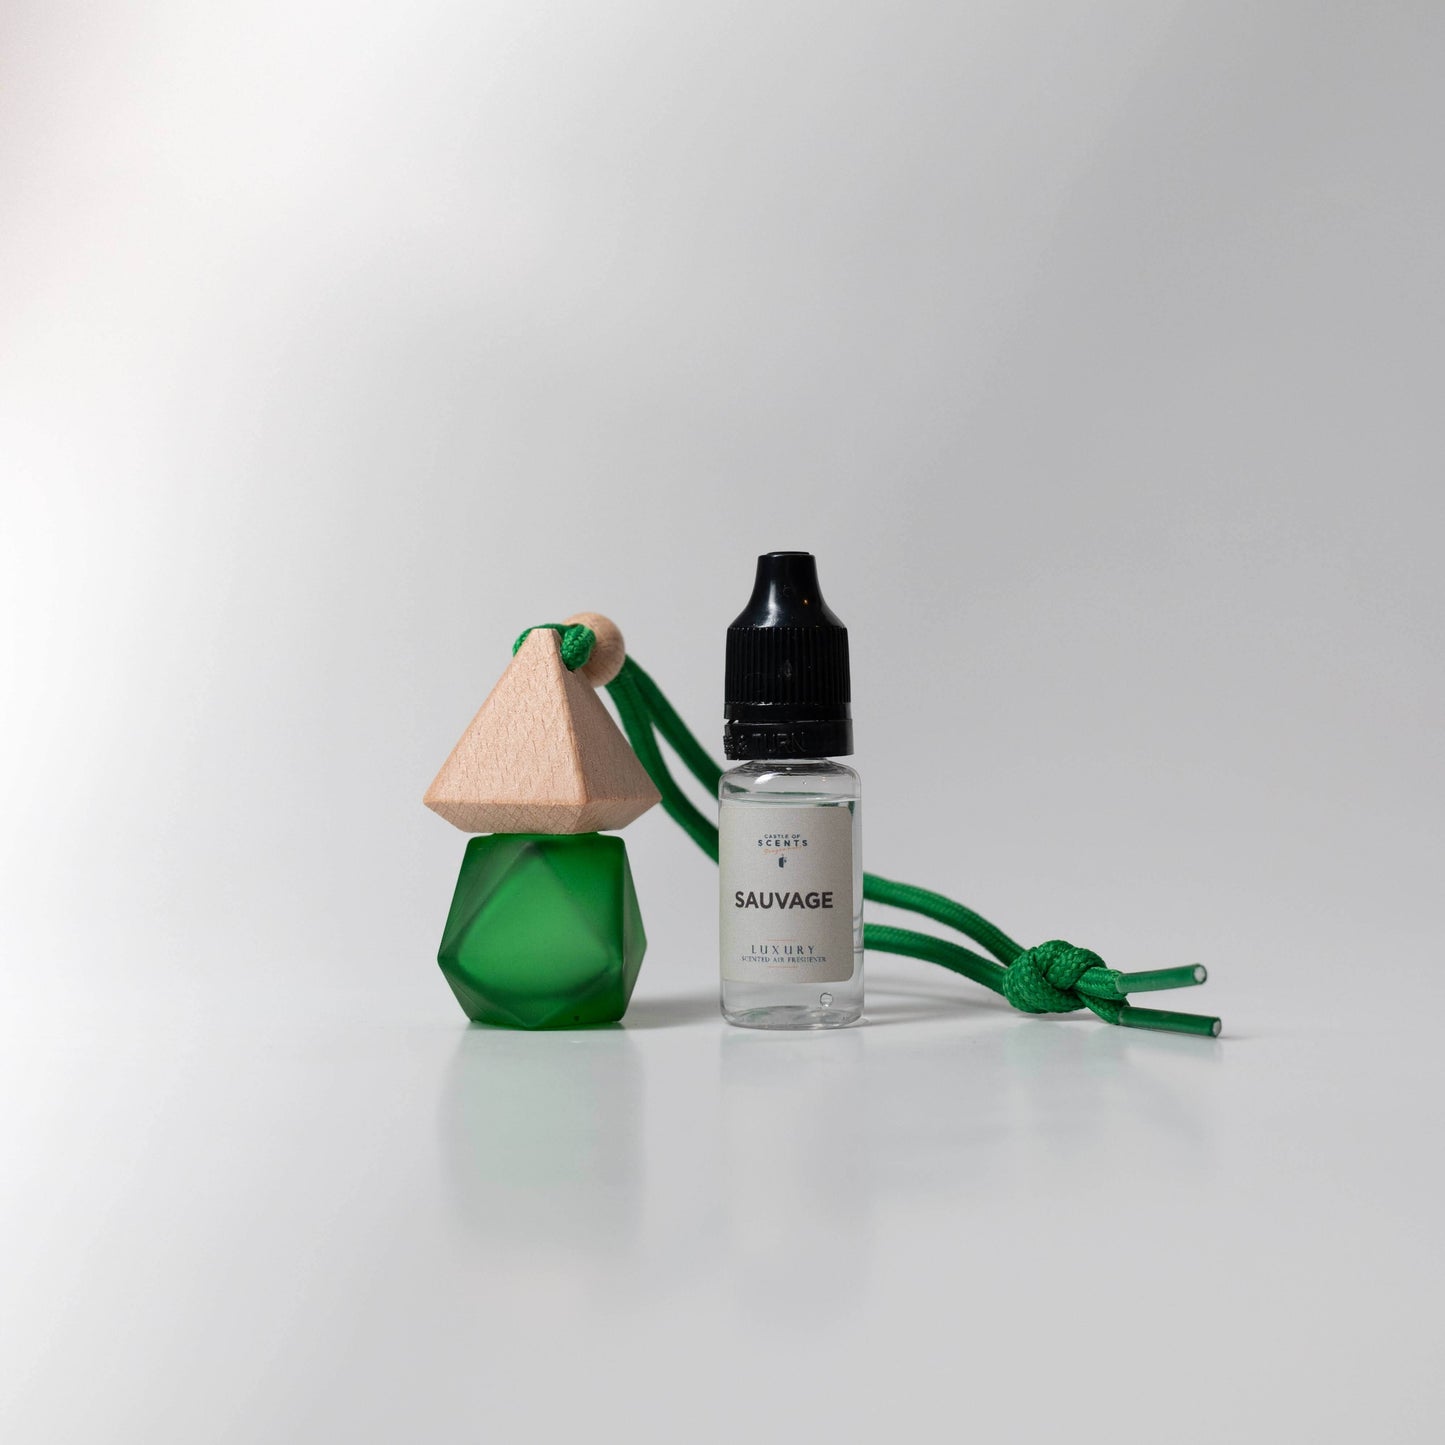 www.castleofscents.co.uk - Premium Bottle-O-Scent and Refill Bundle - Green - Savage